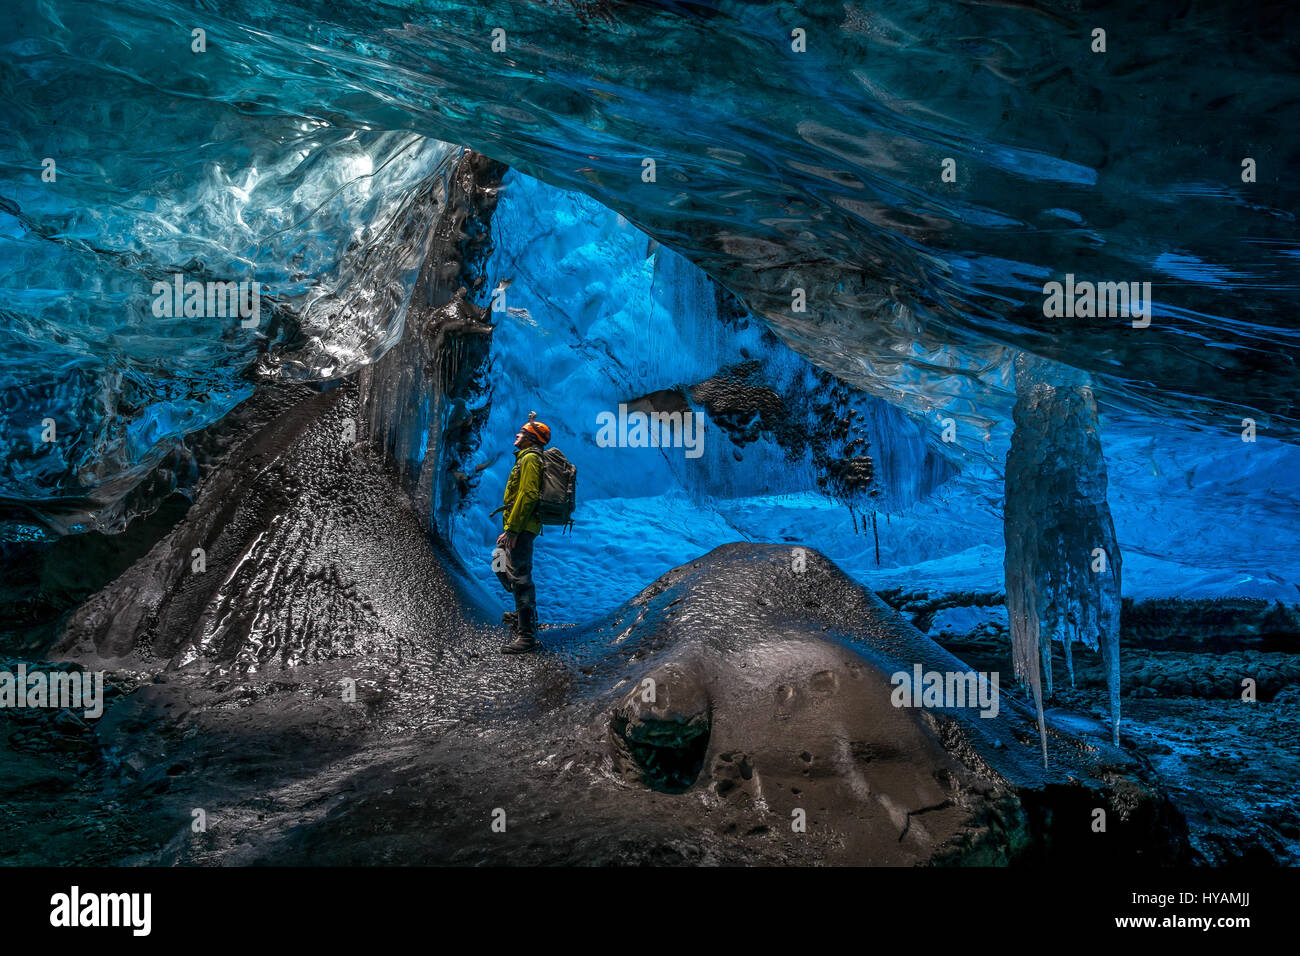 VATNAJOKULL, INCELAND: BRITISH visitors brave flash floods in a bid to explore what could be the world’s most crystal clear network of ice caves. From the cave entrance surrounded by shards of ice like giant teeth, to the maze-like warren of interconnected frozen chambers, he stunning network of ice caves around has proved such a hit with British visitors it hosts around 200 of us each winter. Pictures by local guide Einar Runar Sigurosson from the south side of Vatnajokull glacier in Iceland showcase the glory of one of nature’s most awe-inspiring natural wonders. Stock Photo